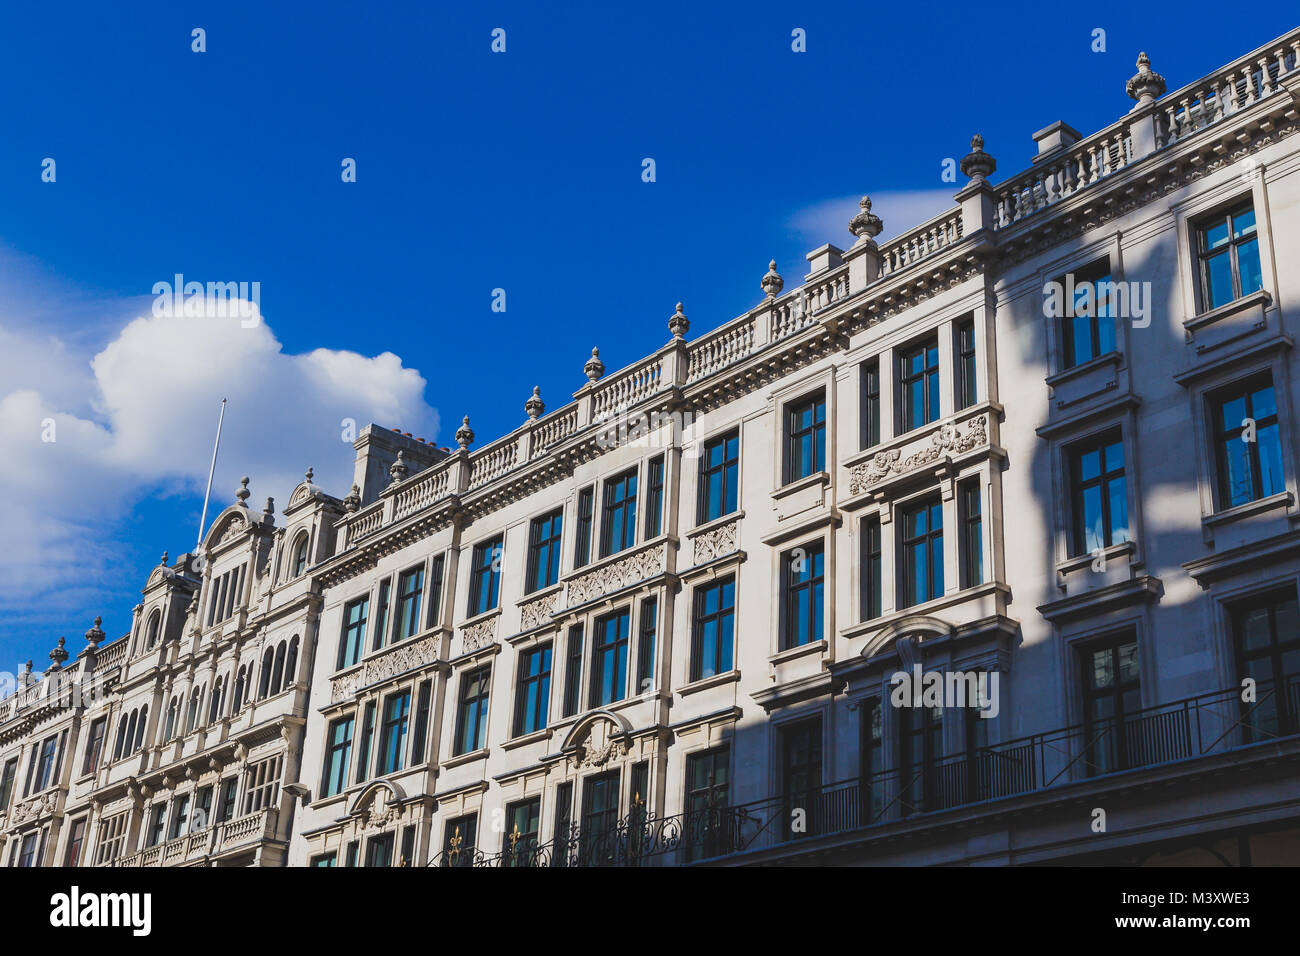 LONDON, UNITED KINGDOM - August, 22th, 2015: detail of Regent Street in central London under a vibrant sky Stock Photo